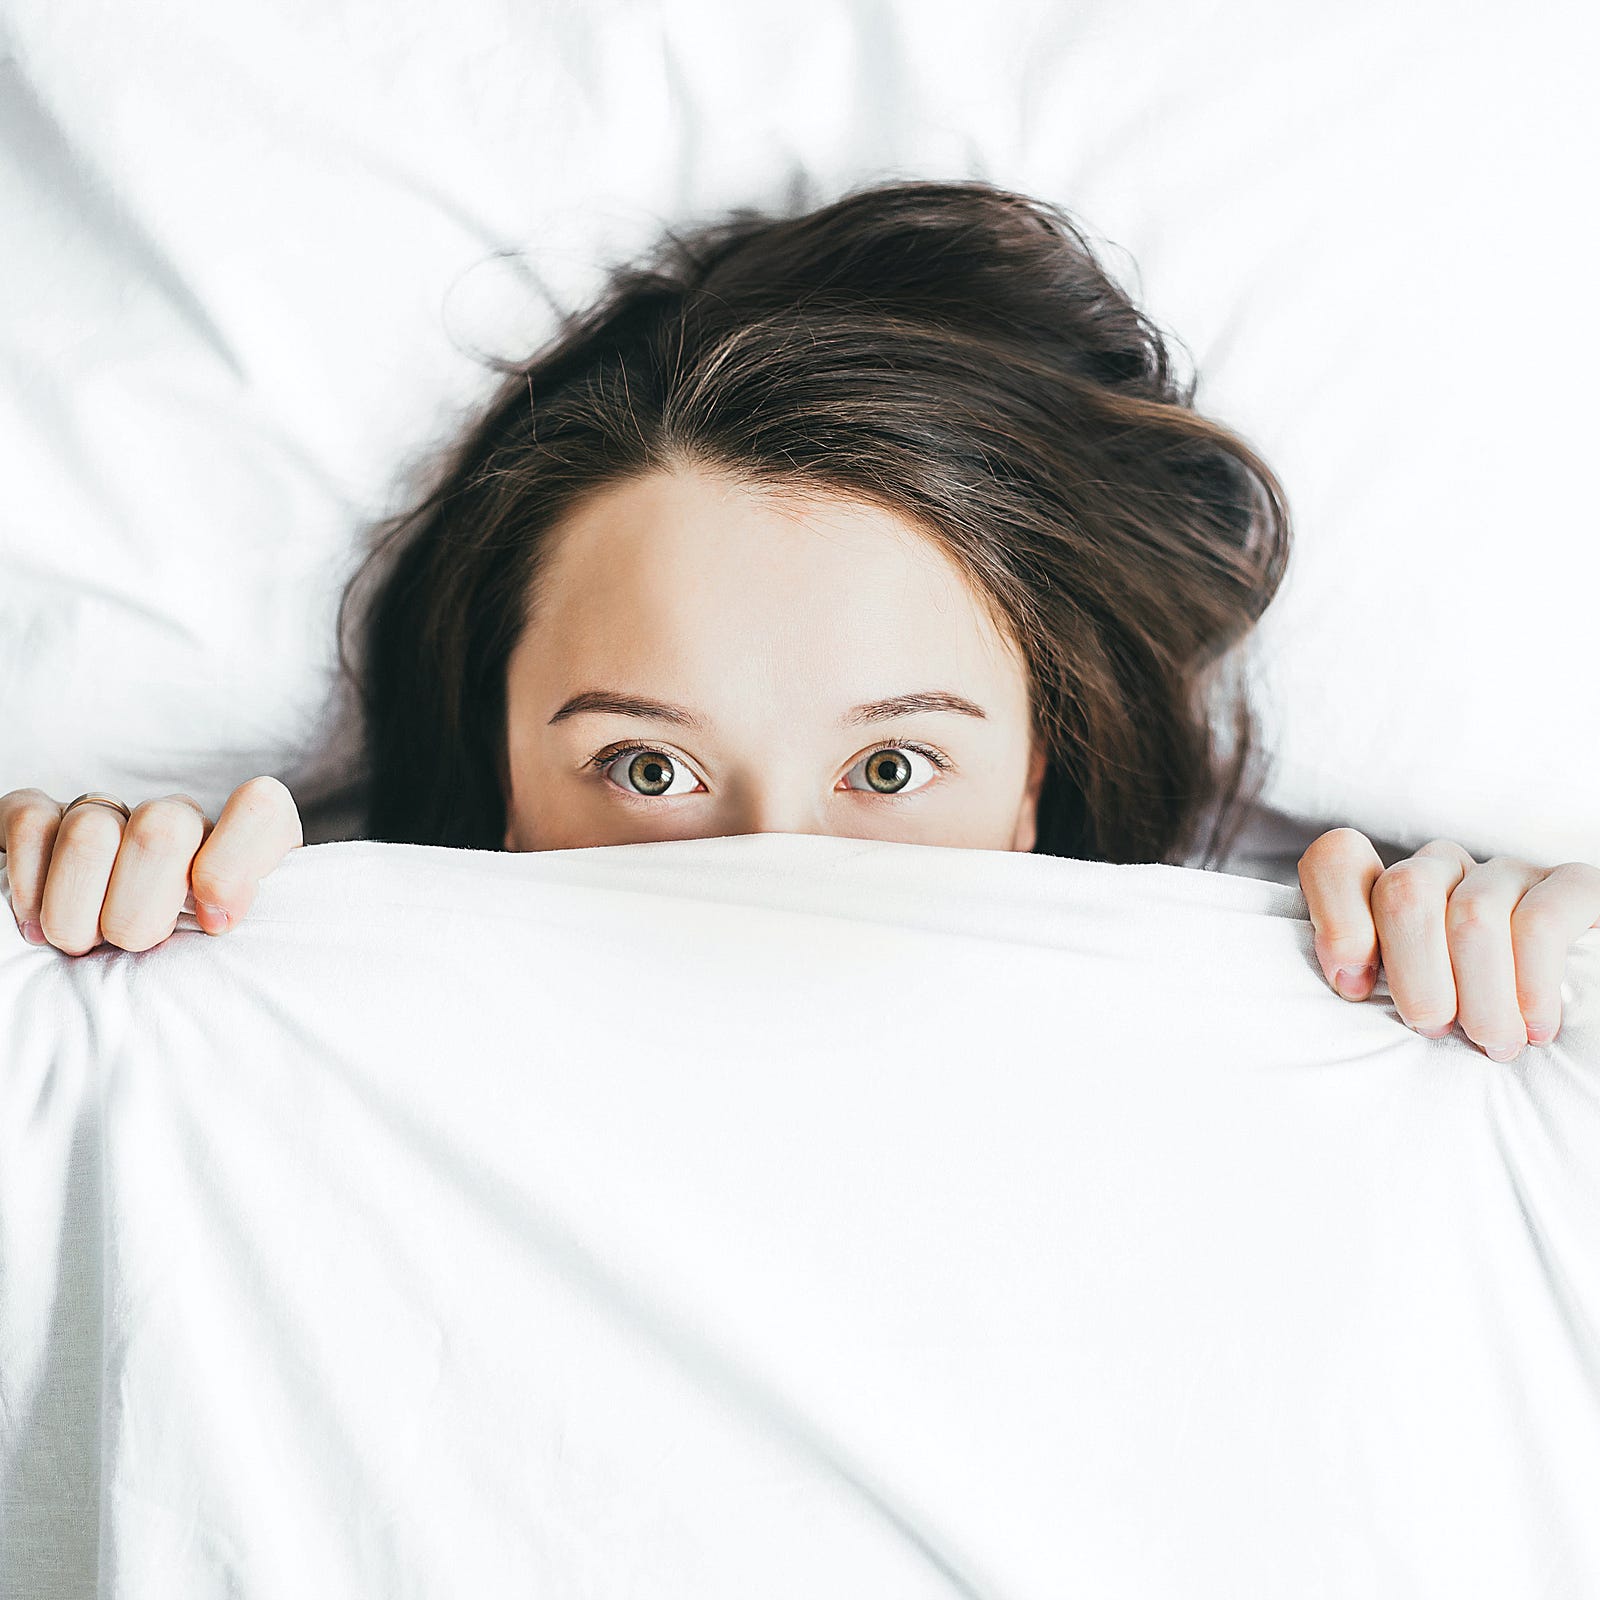 A woman lies on her back in bed. She peers out over her sheets; we see her from mid-nose up. About 5 percent of women go into early menopause, having symptoms between ages 40 and 45. One percent go into premature menopause before reaching age 40.